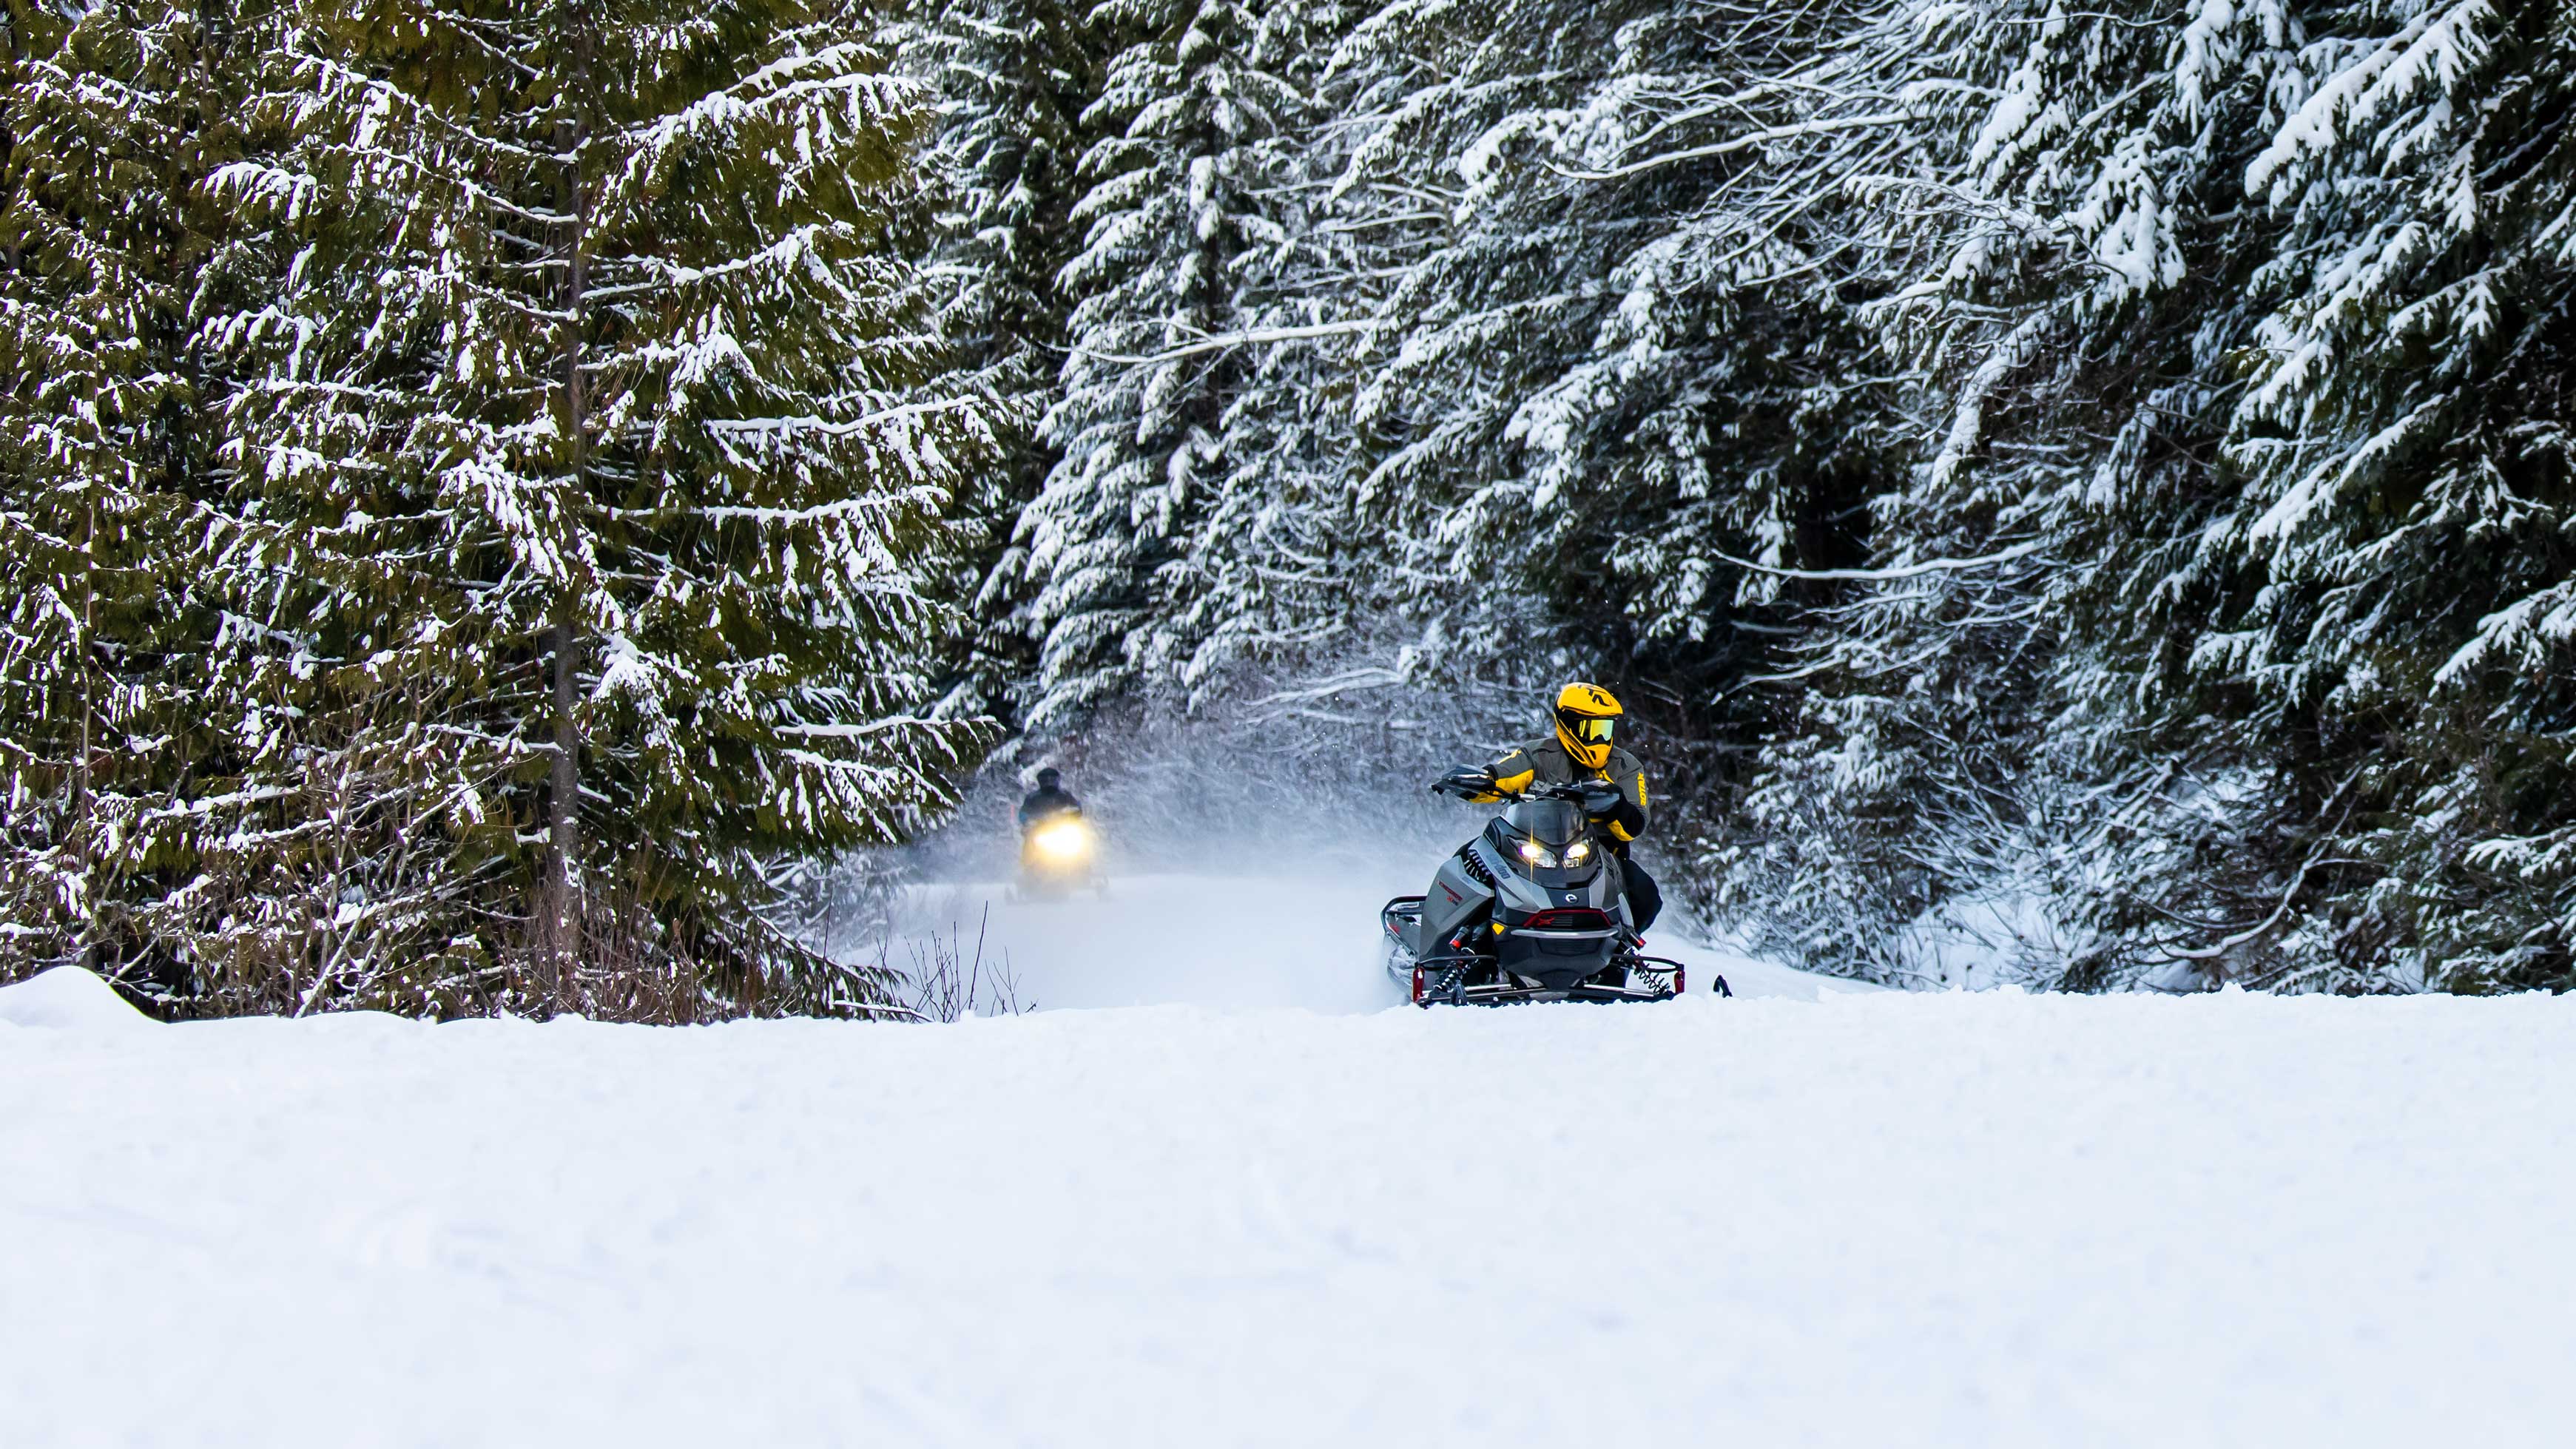 Two riders driving Ski-Doo snowmobiles in trail